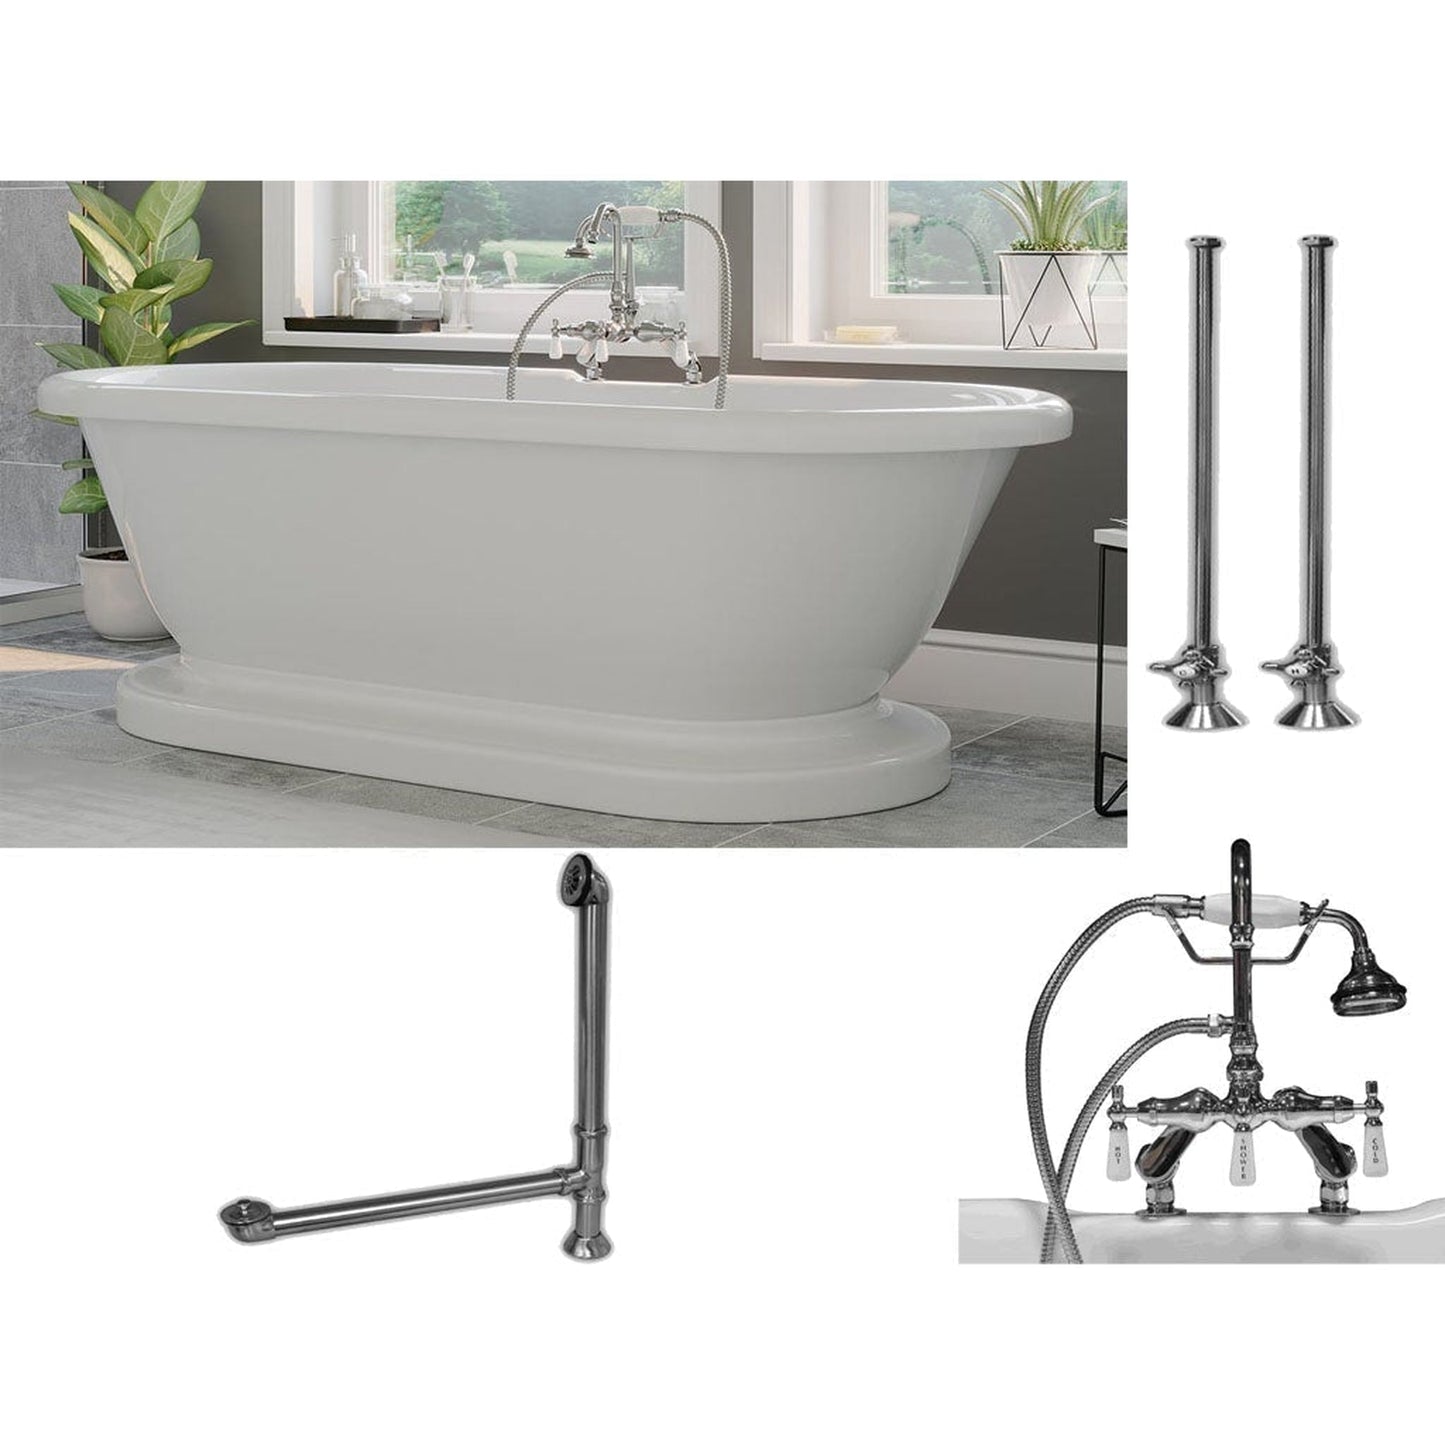 Cambridge Plumbing 70" White Acrylic Double Ended Pedestal Bathtub With Deck Holes And Complete Plumbing Package Including Porcelain Lever English Telephone Brass Faucet, Supply Lines, Drain And Overflow Assembly In Polished Chrome